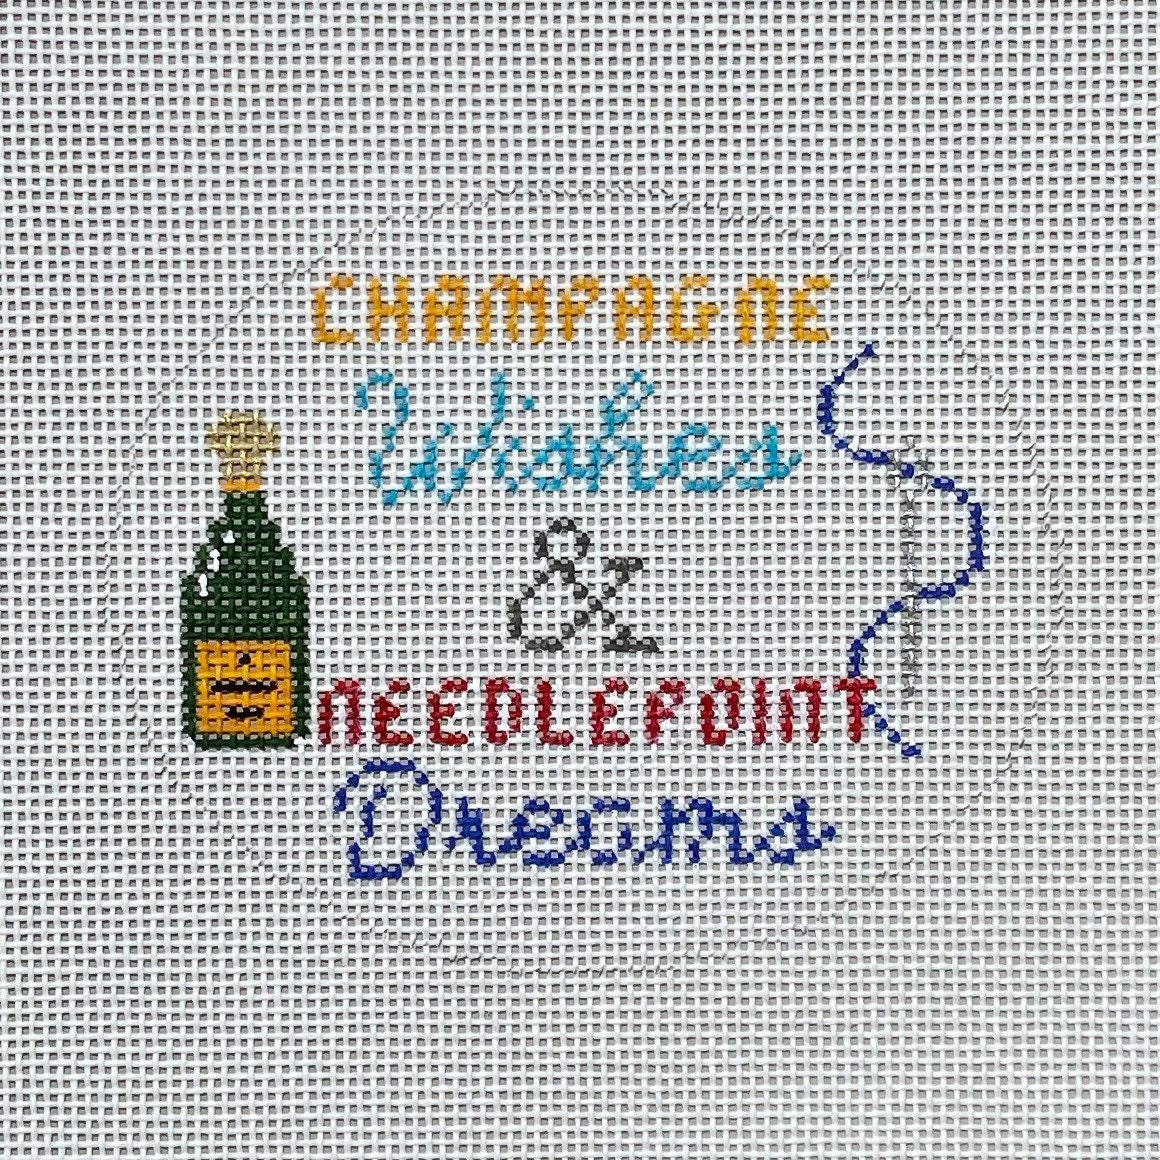 Veuve Champagne Bottle in Louis Vuitton Check Design handpainted Nee –  Needlepoint by Wildflowers